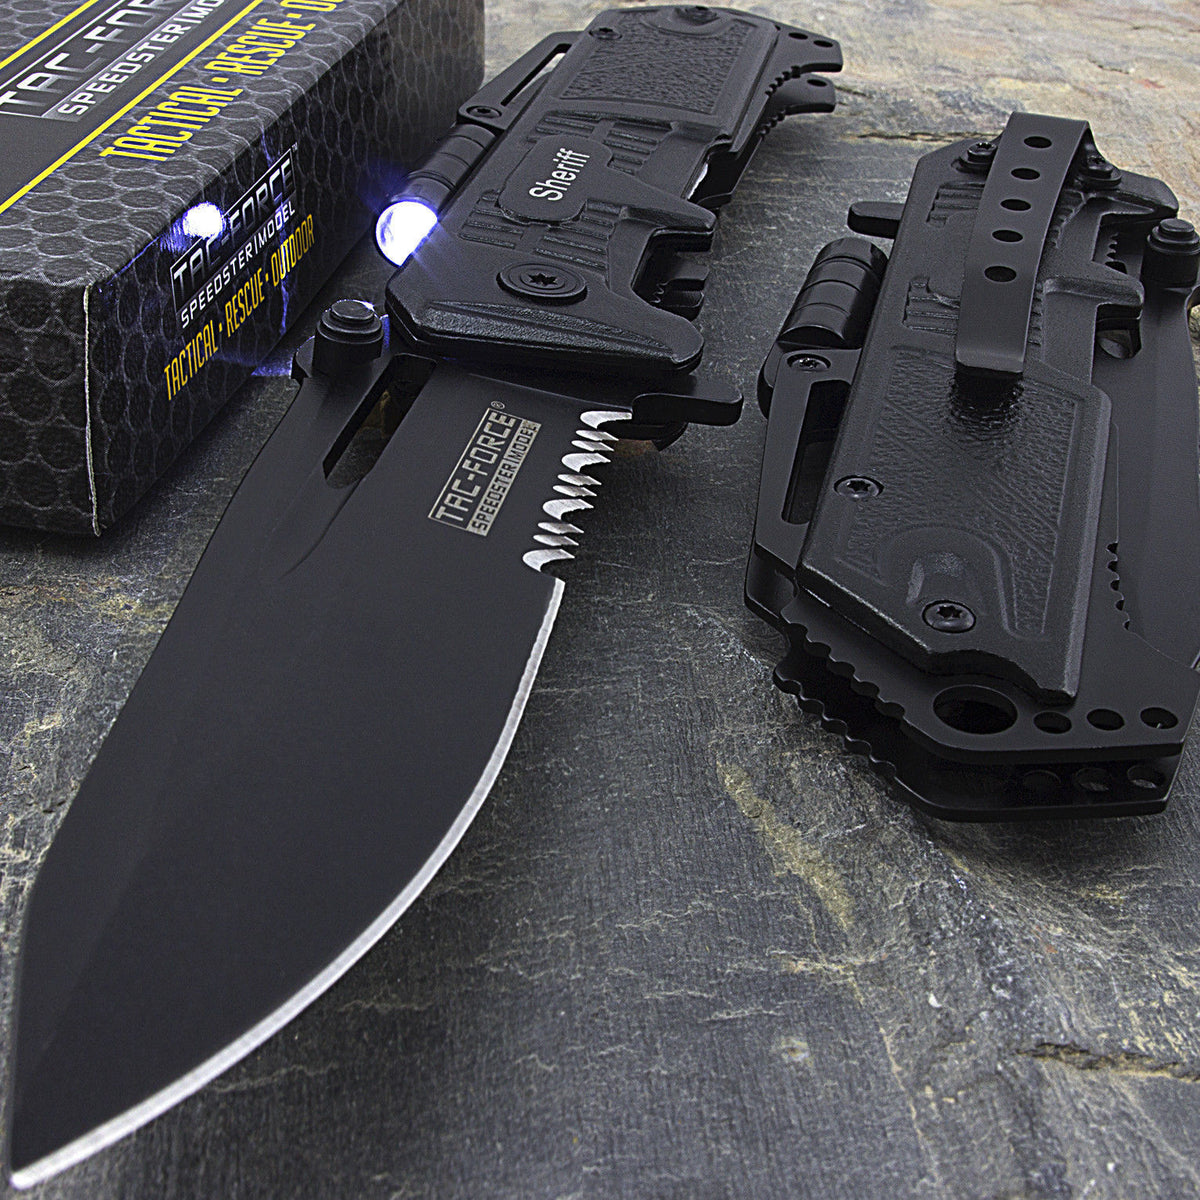 Special Force Pocket Knife With built in Flashlight